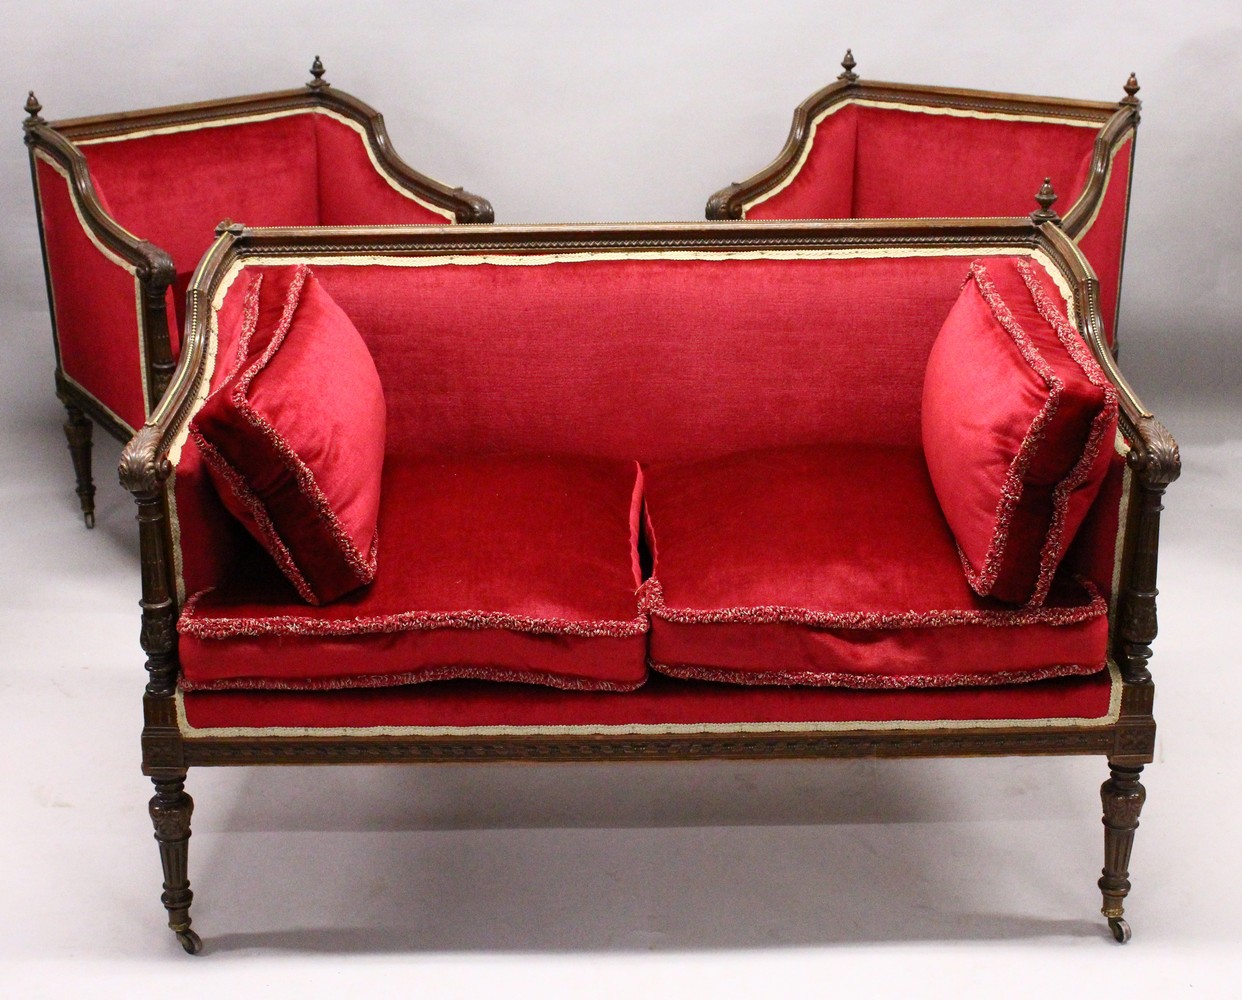 AN EDWARDIAN MAHOGANY THREE PIECE SUITE, comprising of a two-seater settee and pair of armchairs,